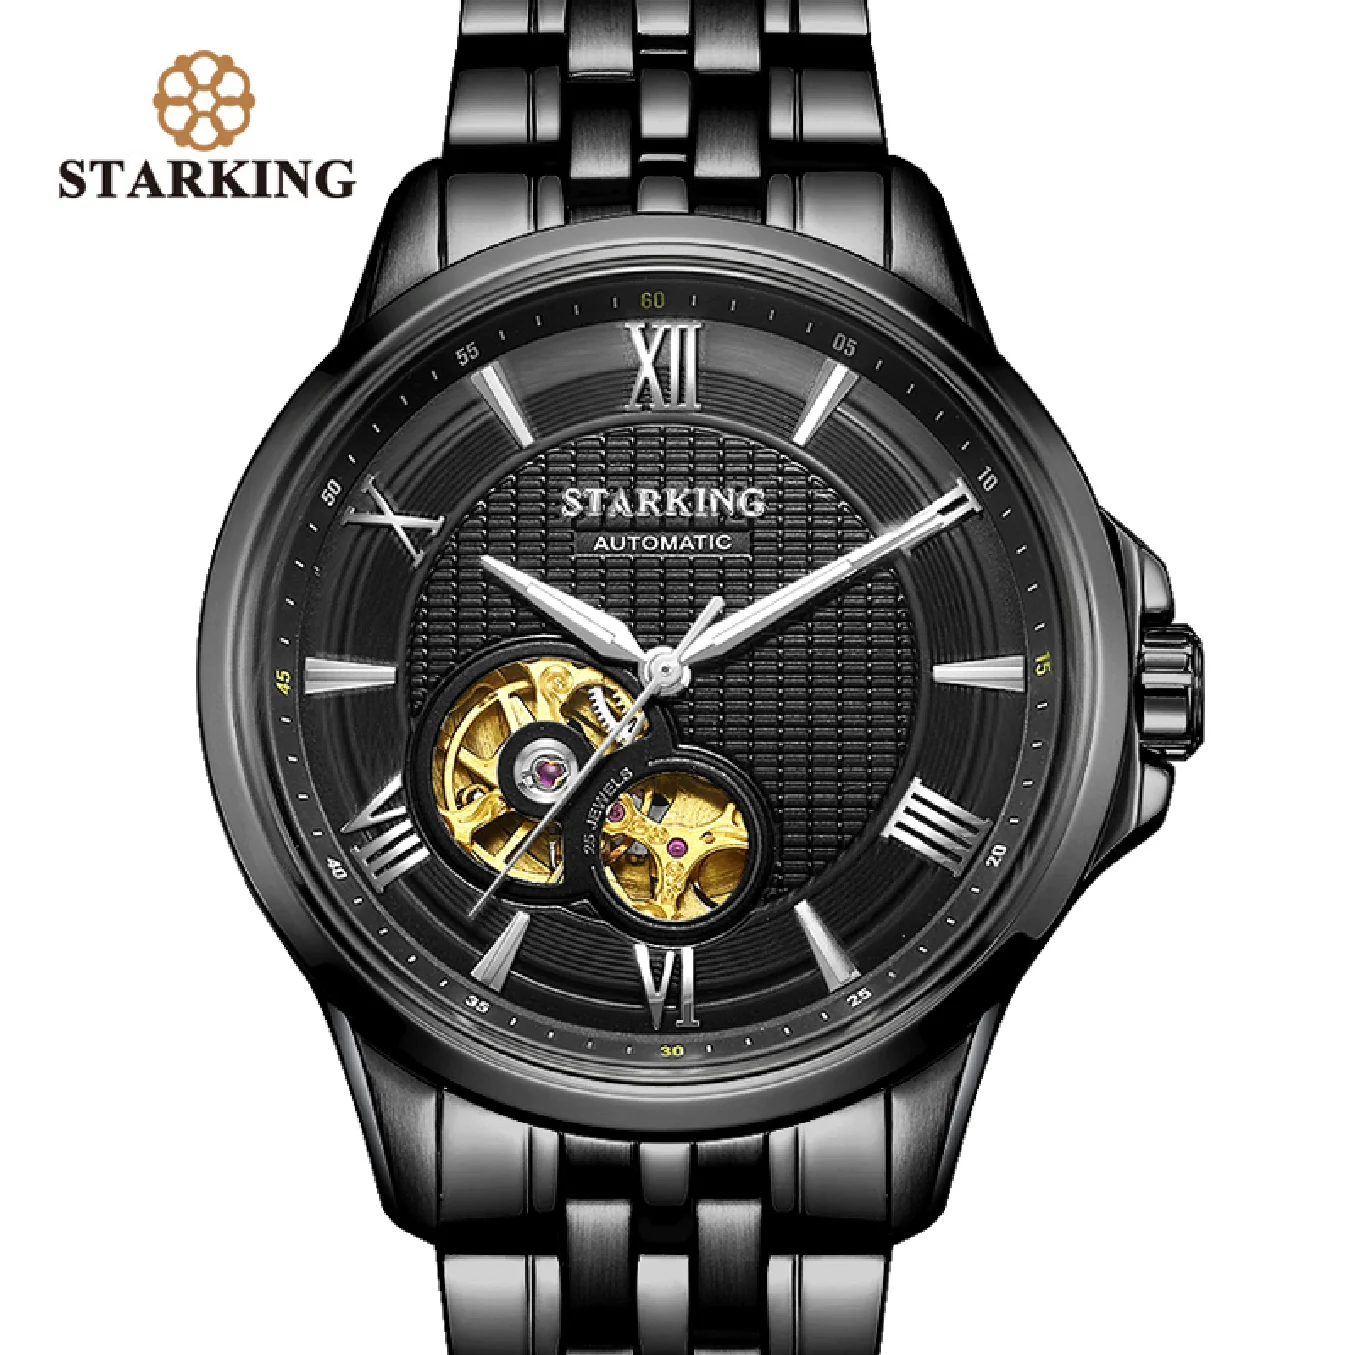 

STARKING Men Skeleton Automatic Mechanical Watches Stainless Steel Sapphire Crystal Wrist Watch Full Black Hollow relojes hombre